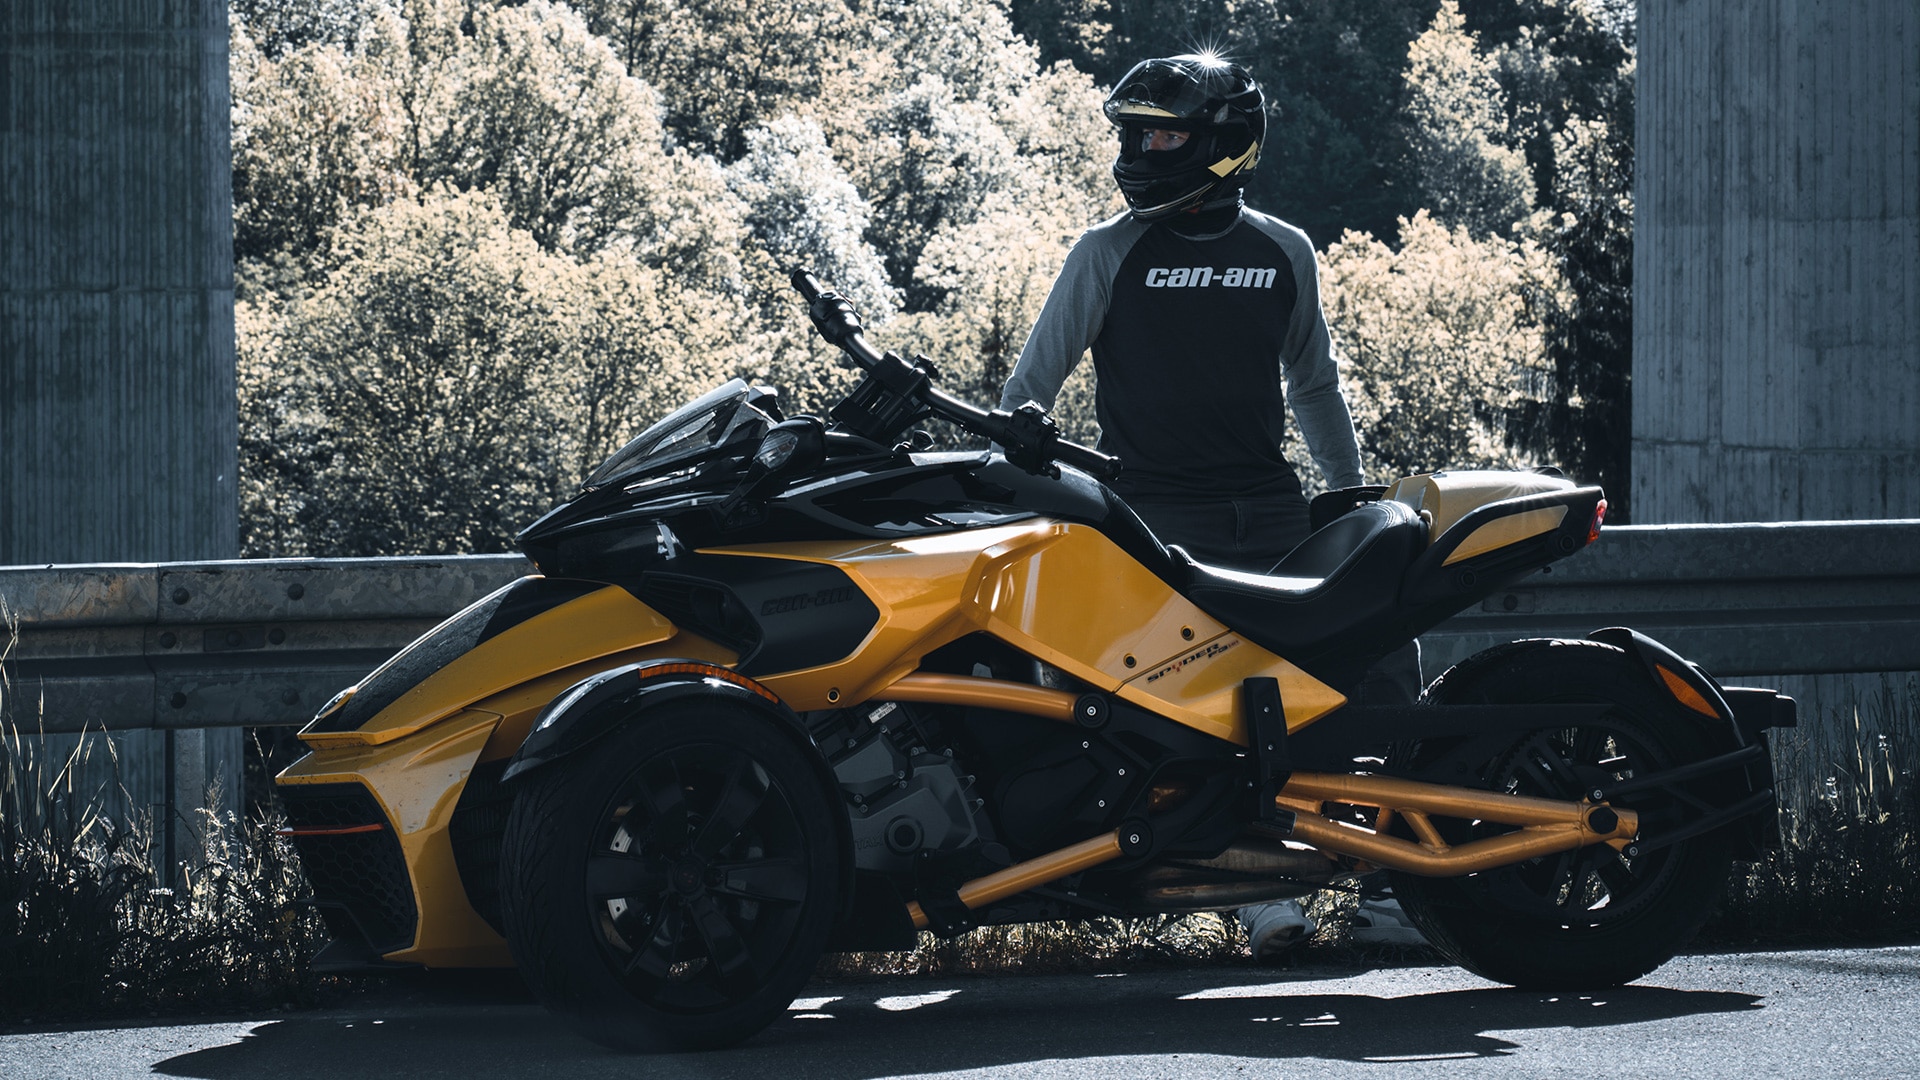 Niko on his Can-Am Spyder F3 in Can-Am gear